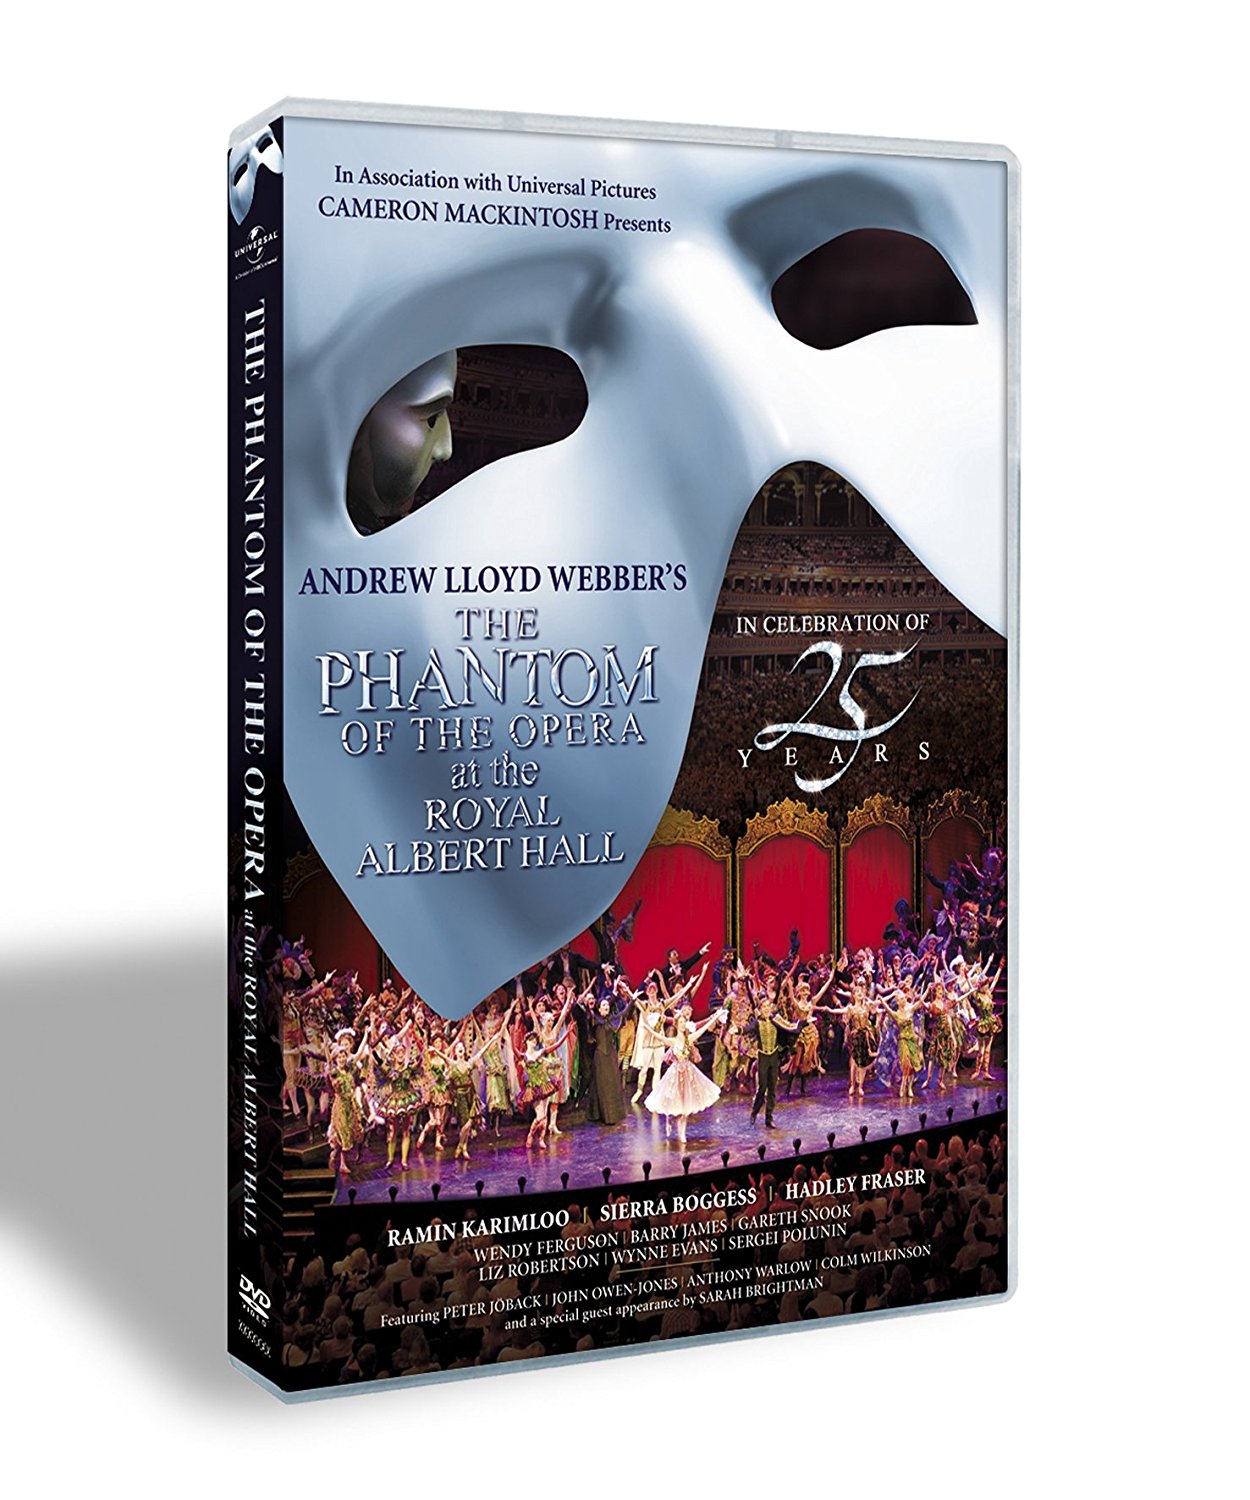 The Phantom of the Opera at the Royal Albert Hall | Nick Morris, Laurence Connor